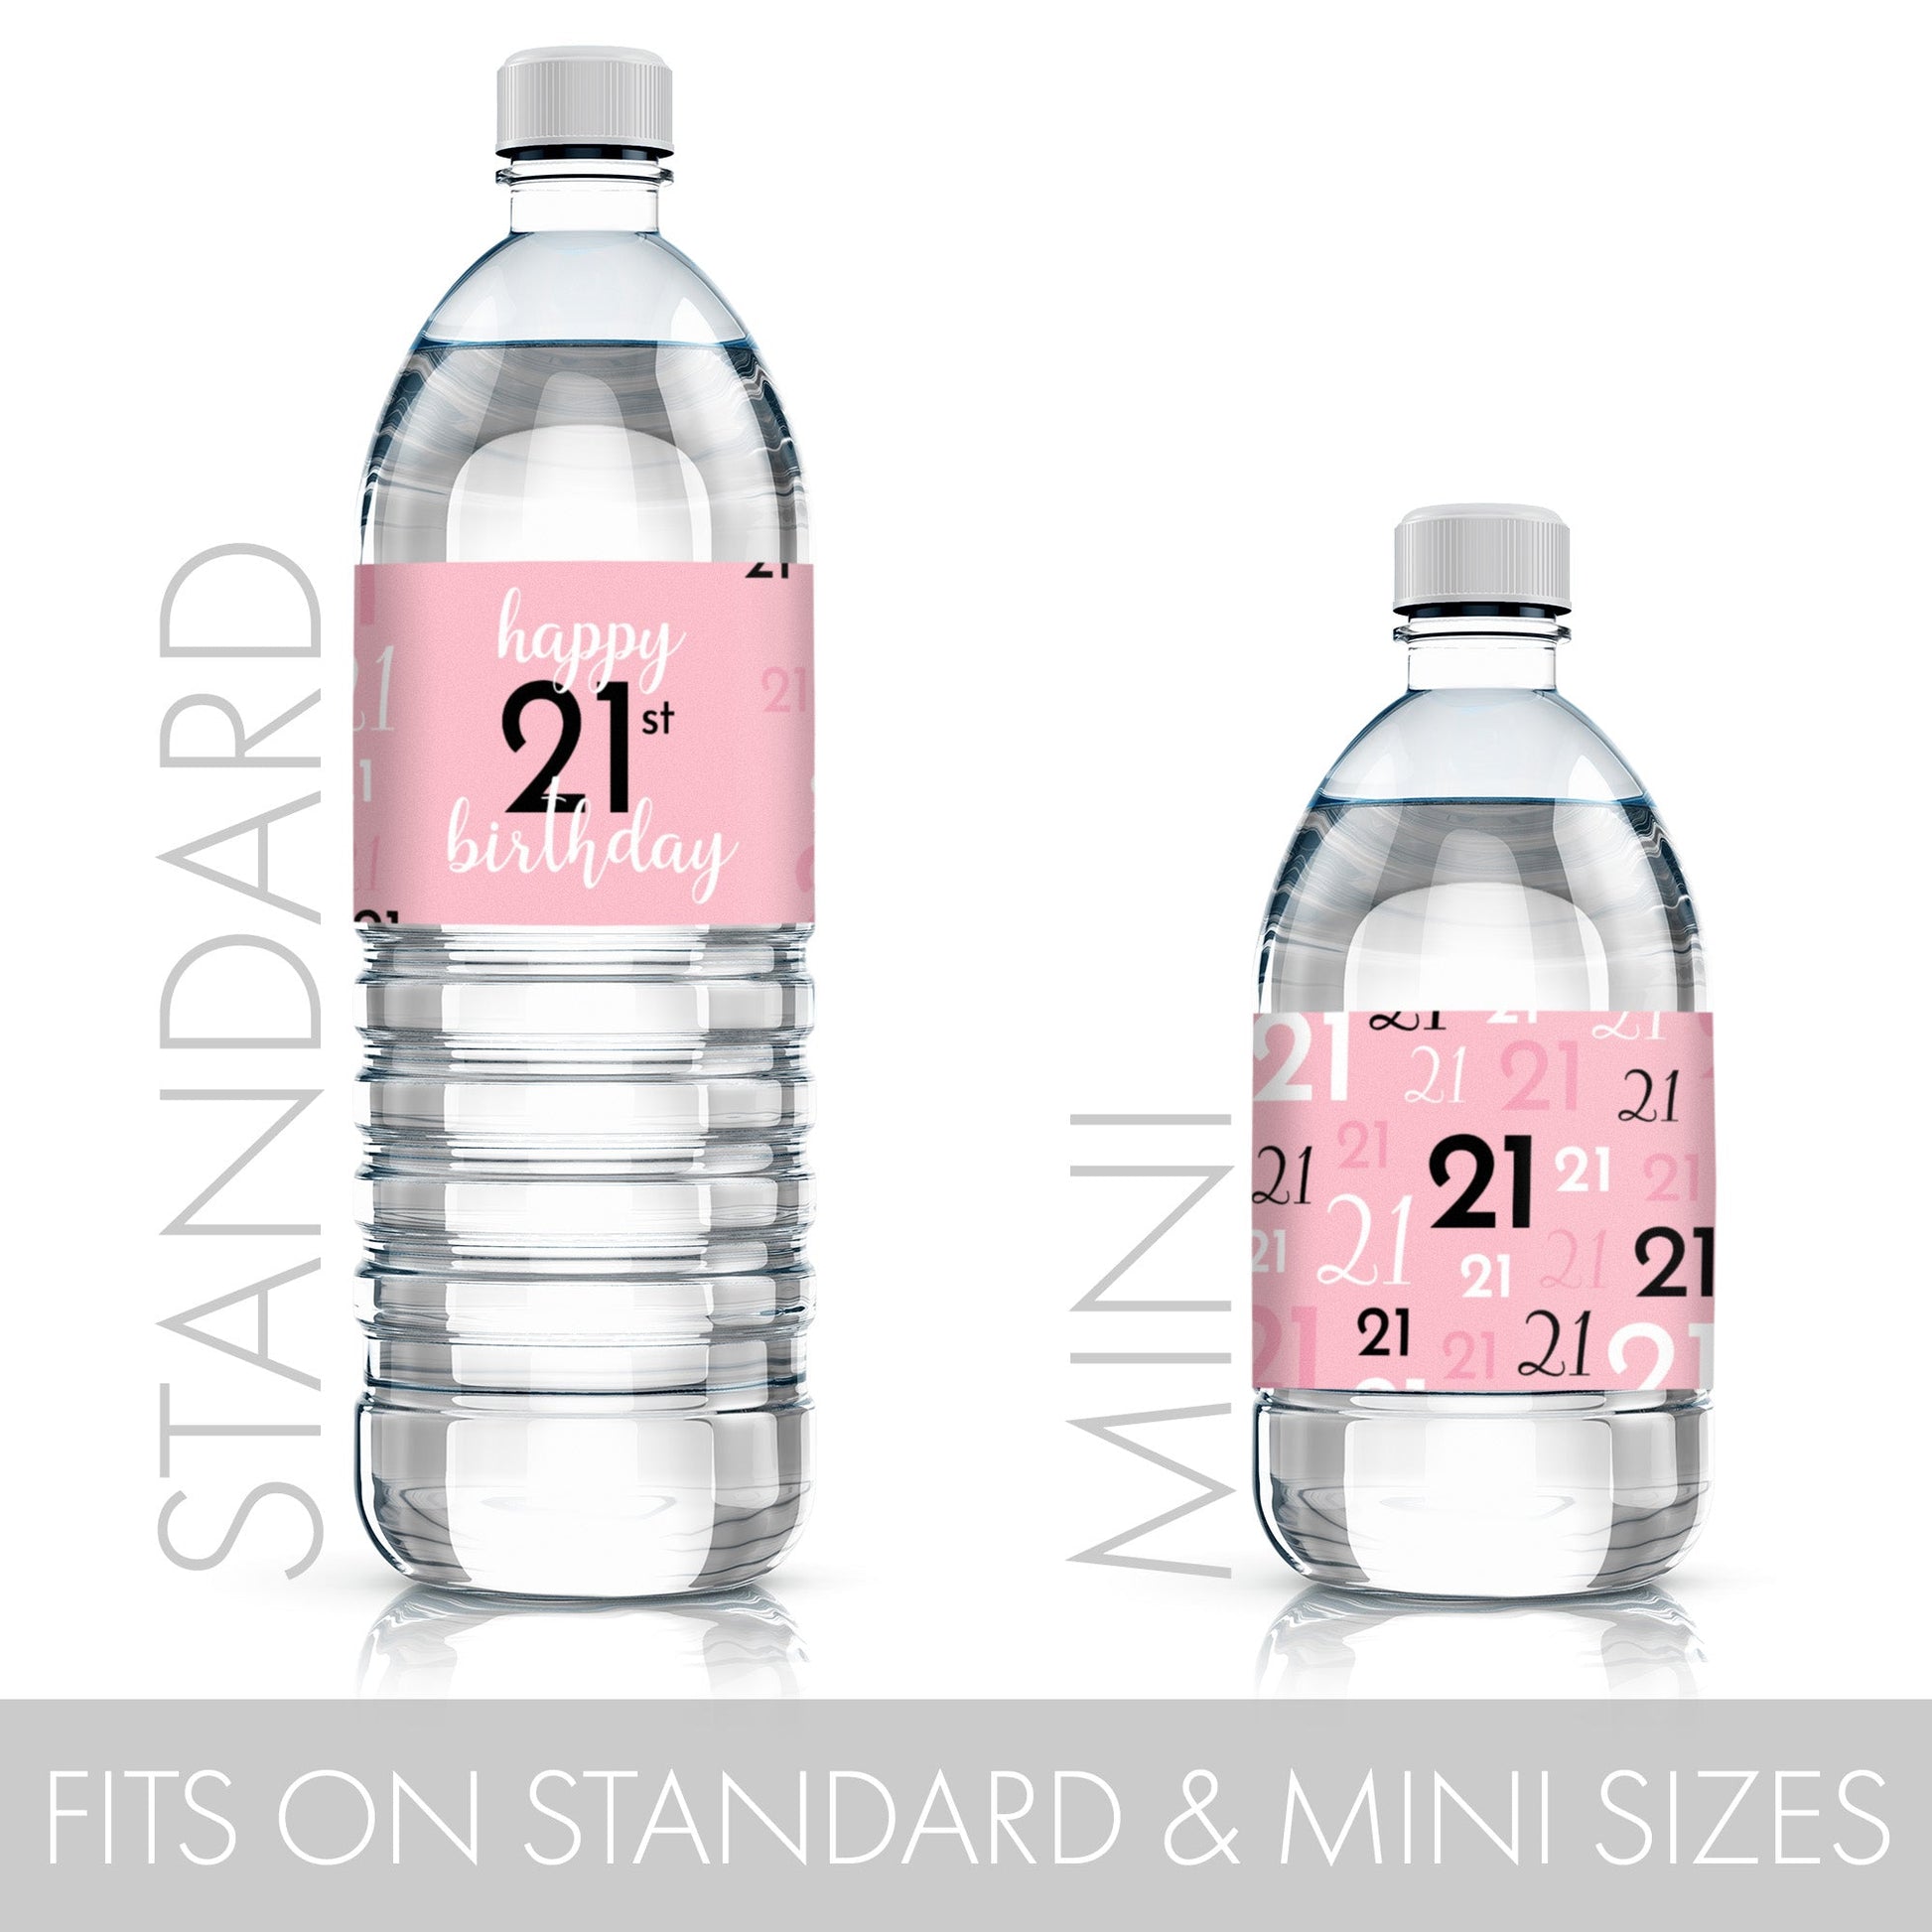 Celebrate in style with pink and black water bottle labels for your 21st birthday